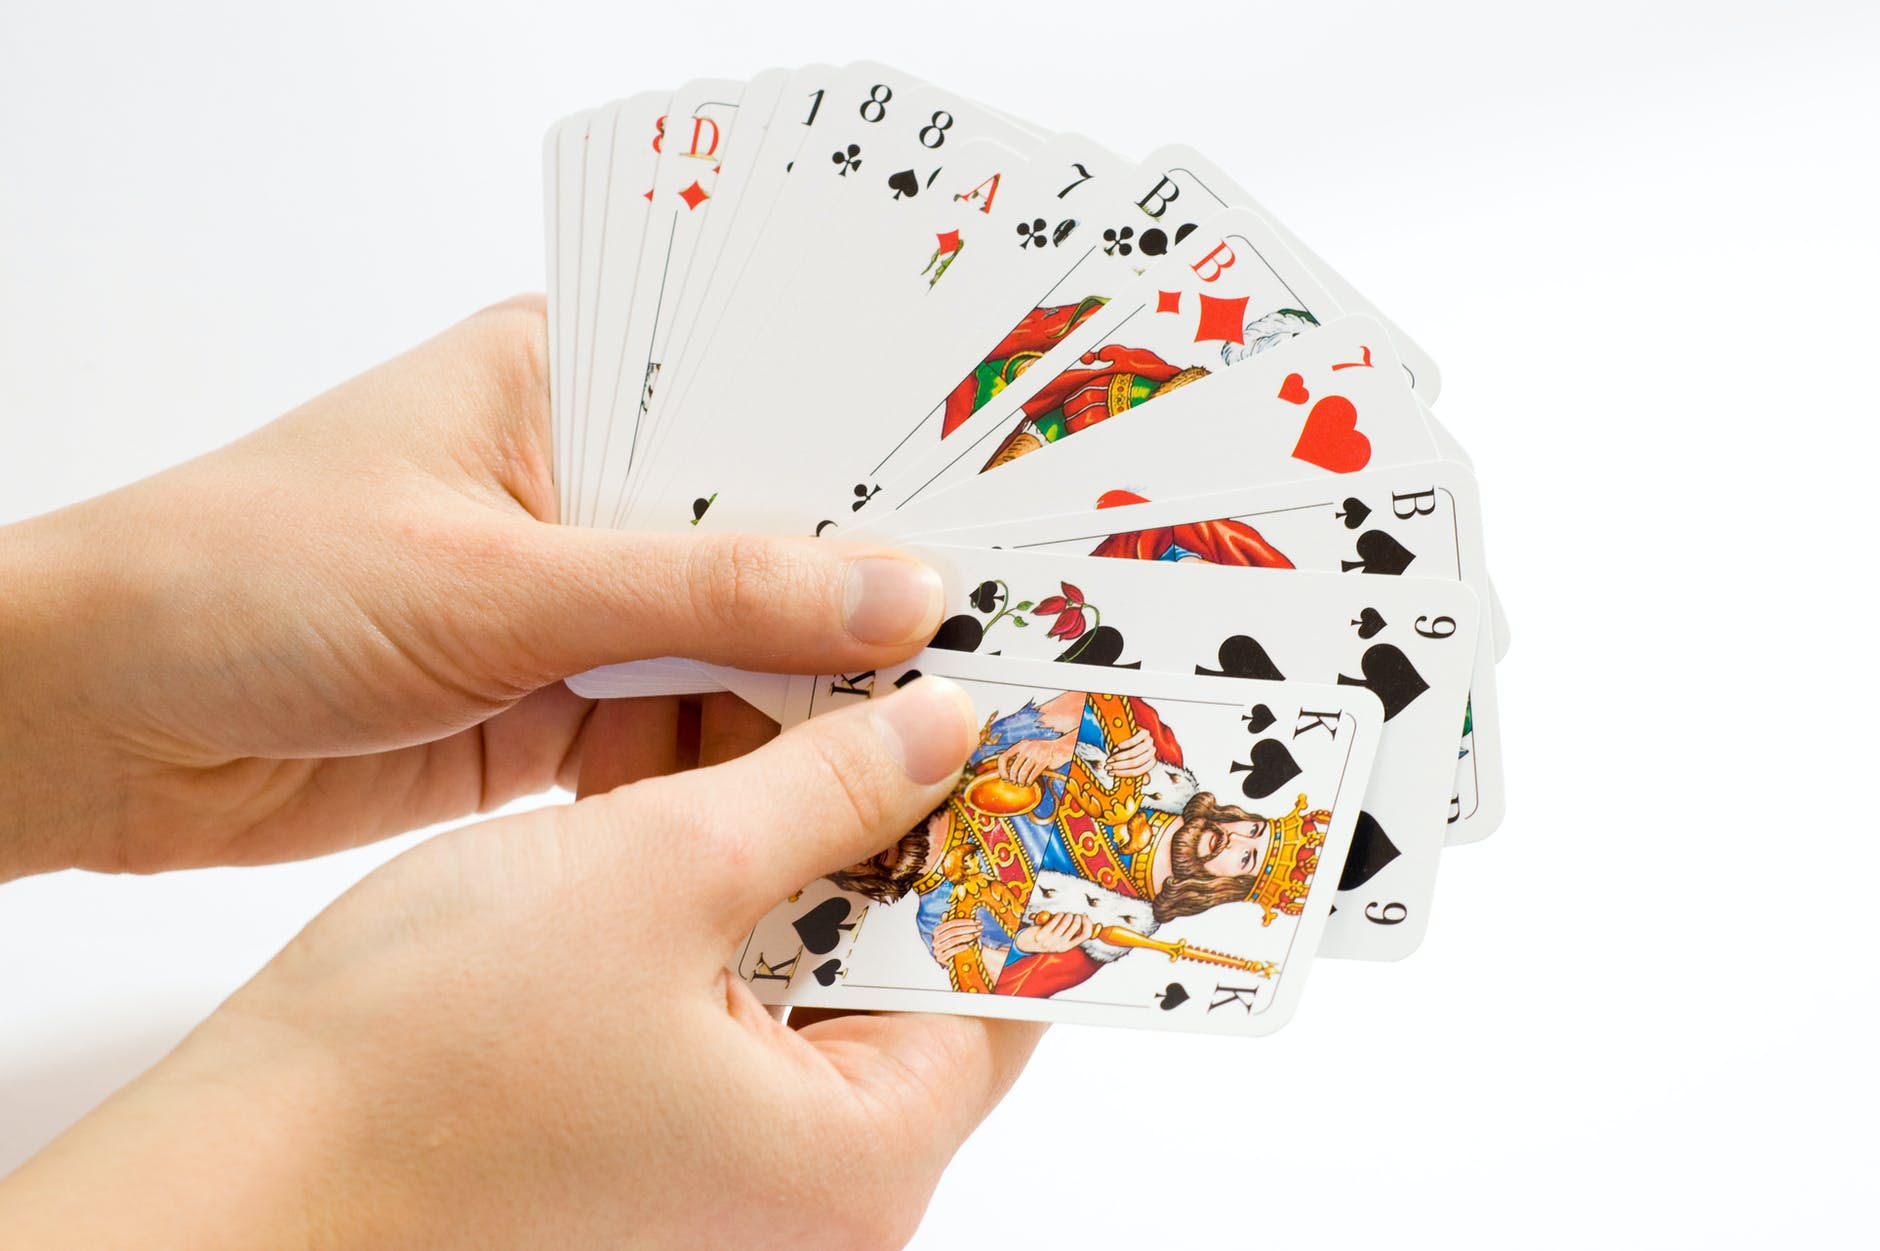 Extremely effective way to play the card game - Win wherever you play